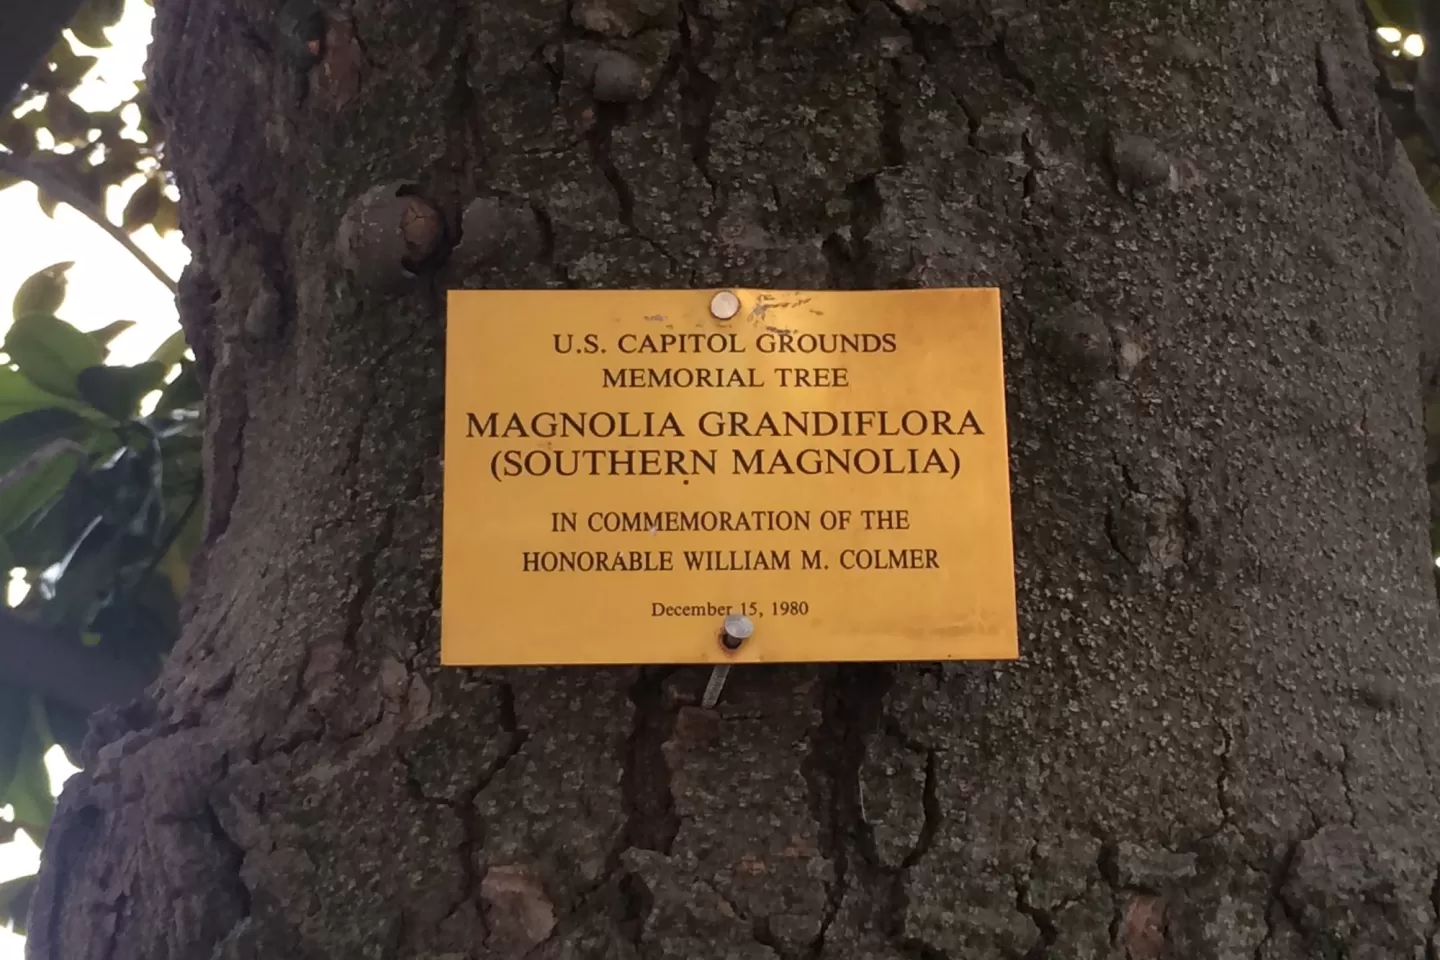 Plaque that reads: U.S. Capitol Grounds Memorial Tree  Magnolia grandiflora (Southern Magnolia)  In Commemoration of the Honorable William M. Colmer  December 15, 1980